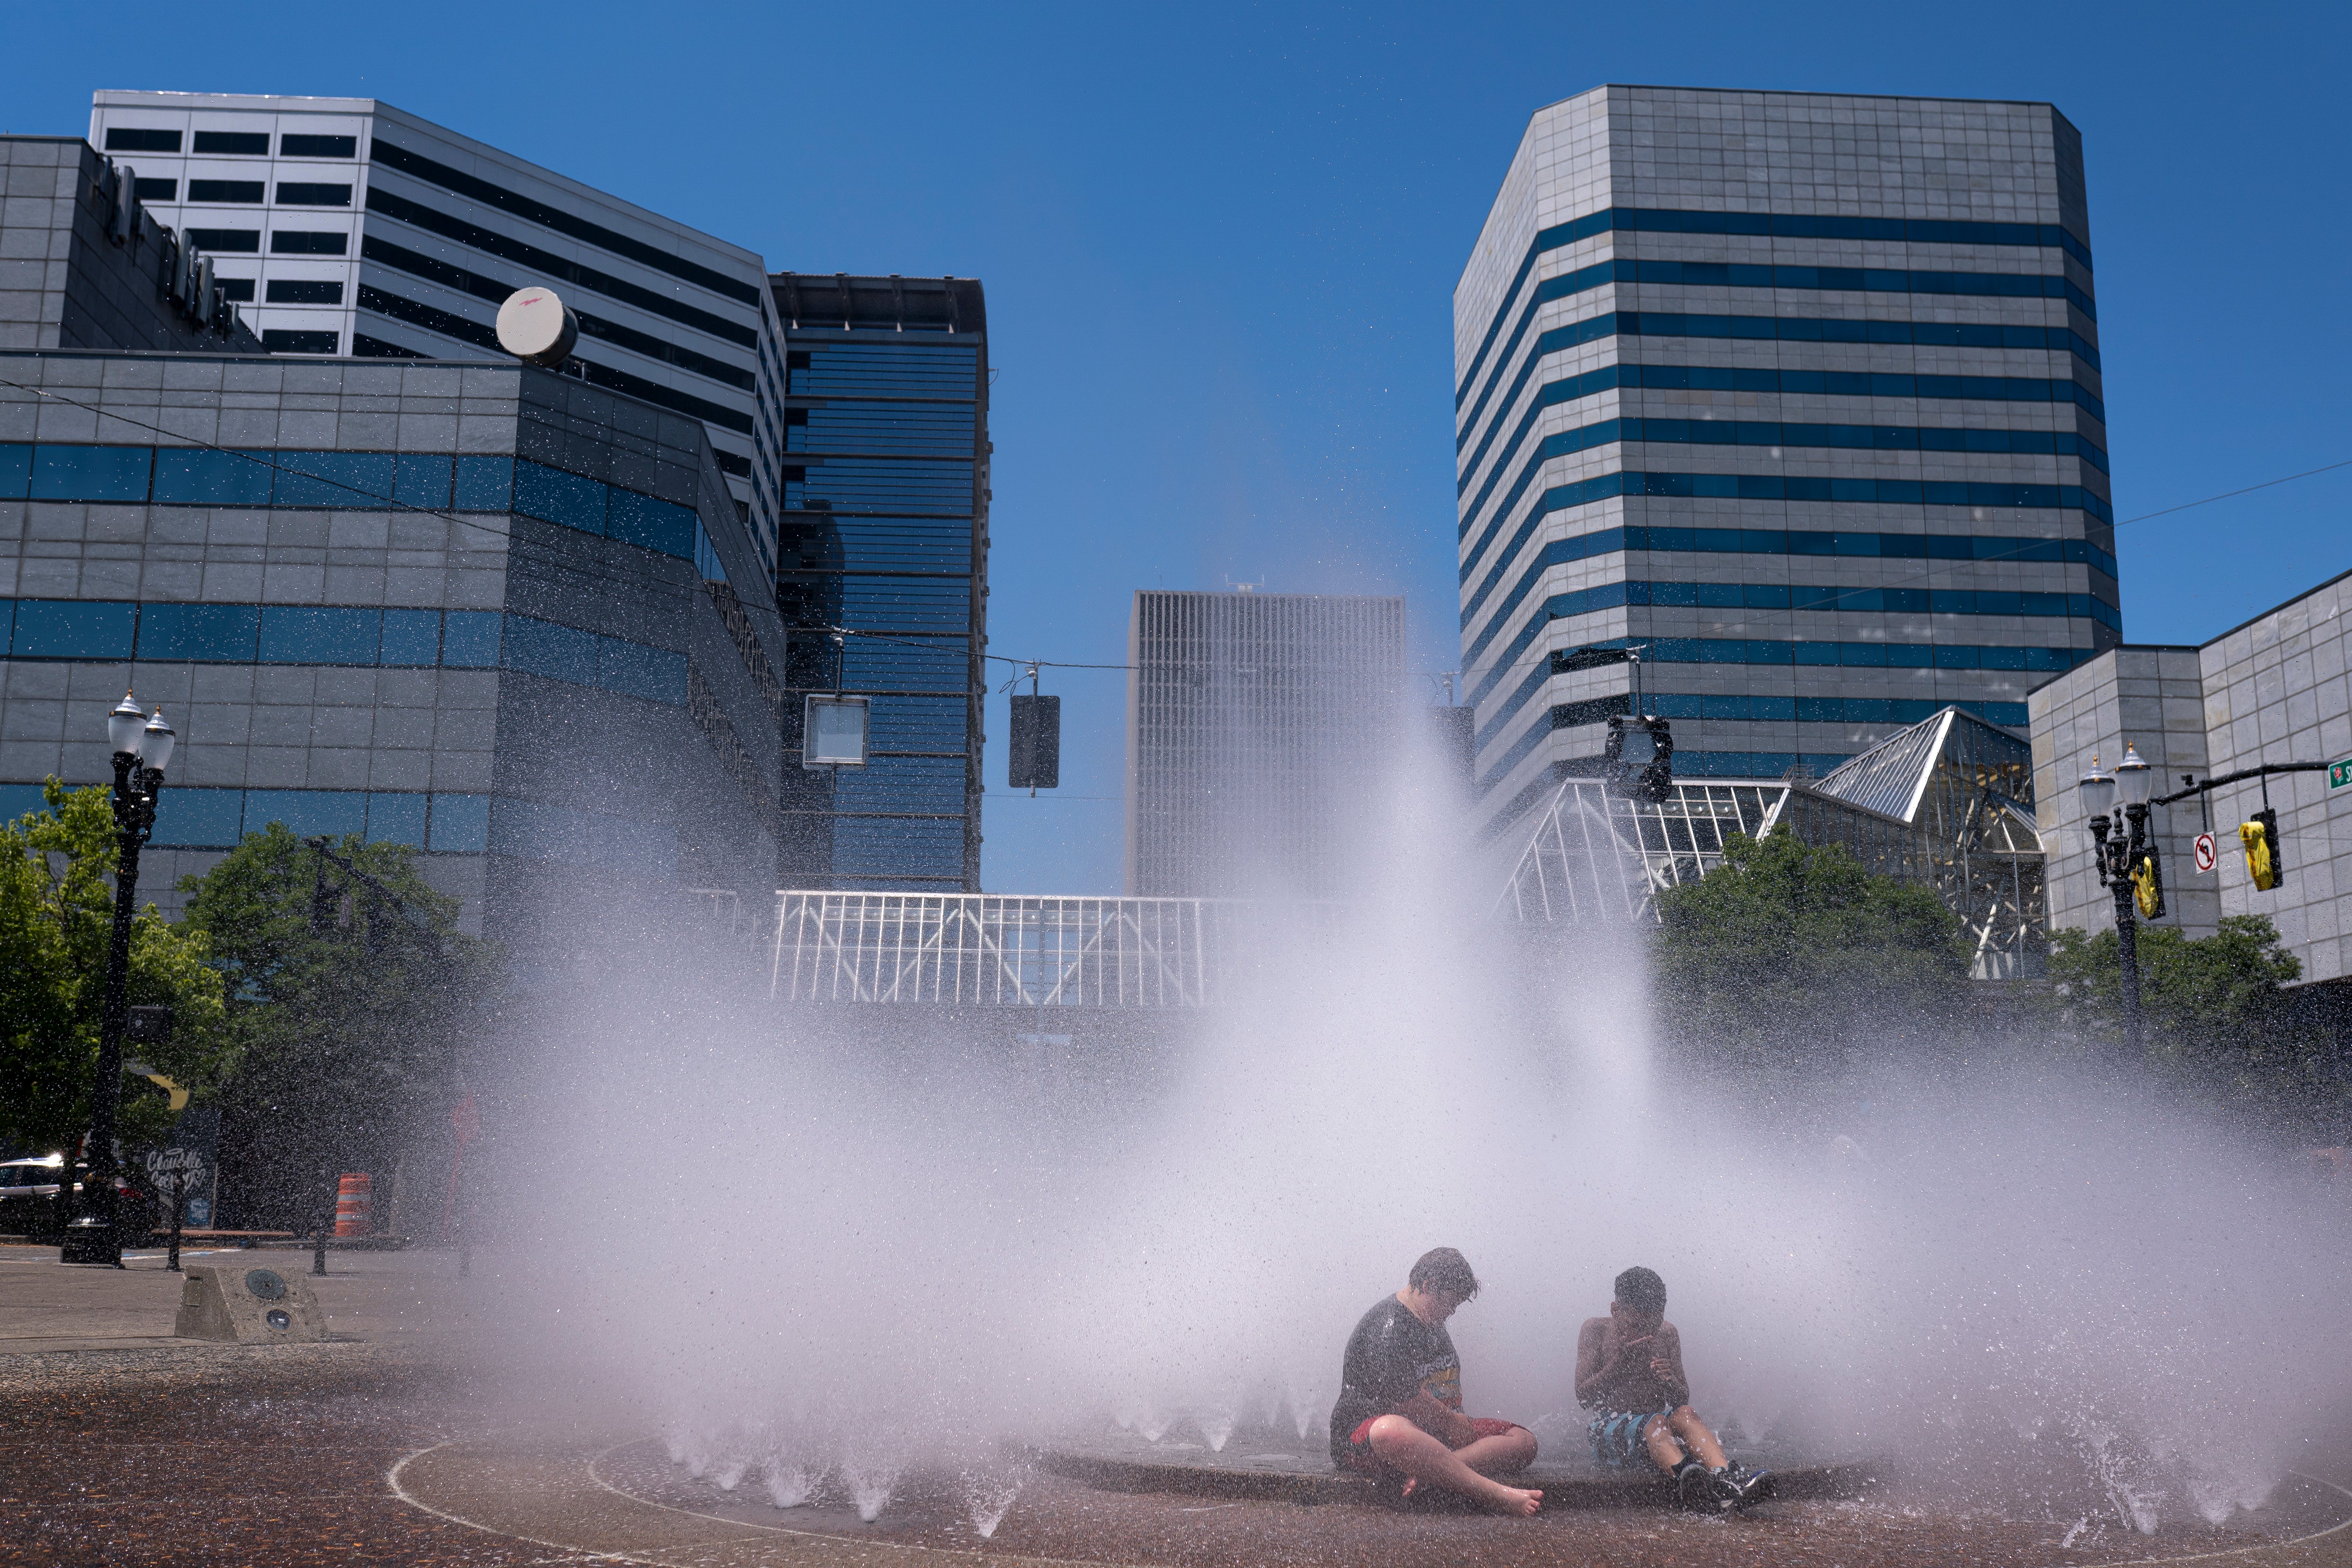 Kids play in the Salmon Springs Fountain on June 27, 2021 in Portland, Oregon. Record breaking temperatures lingered over the Northwest during a historic heatwave this weekend.